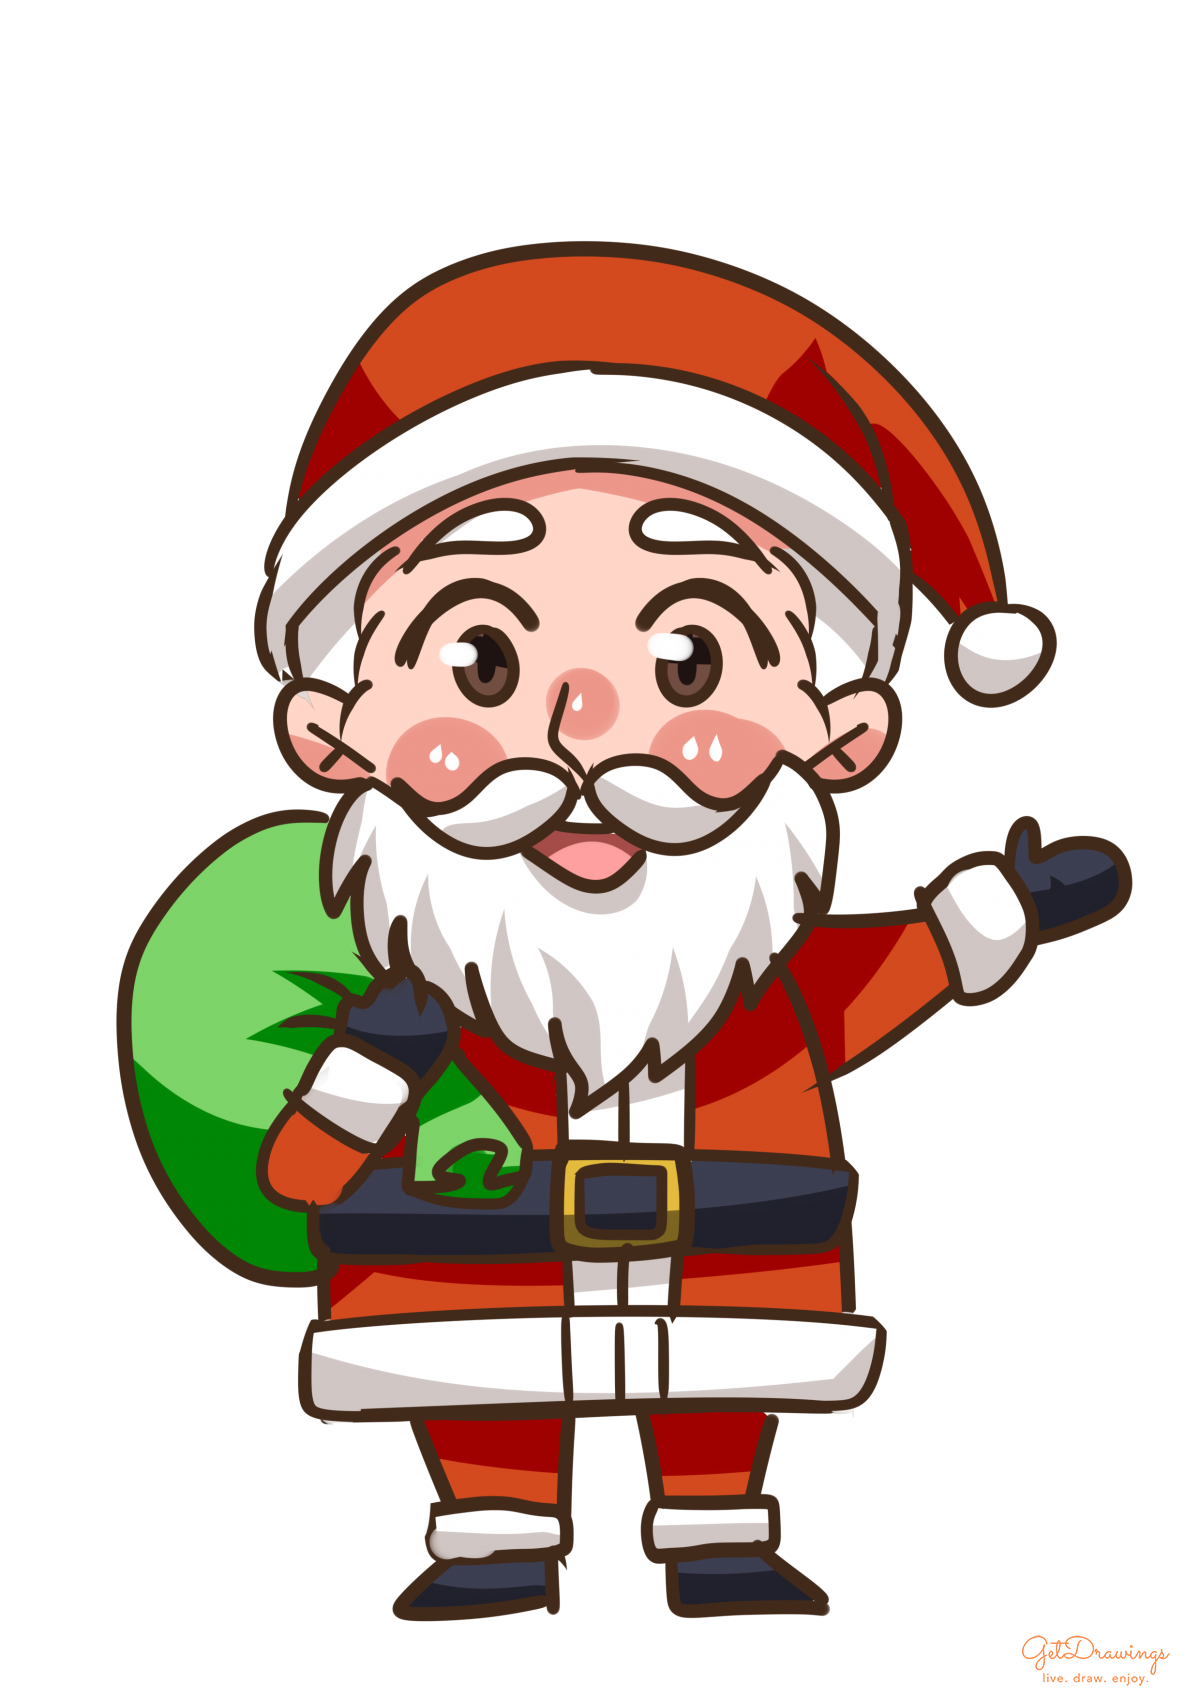 How to draw a Santa Claus | GetDrawings.com